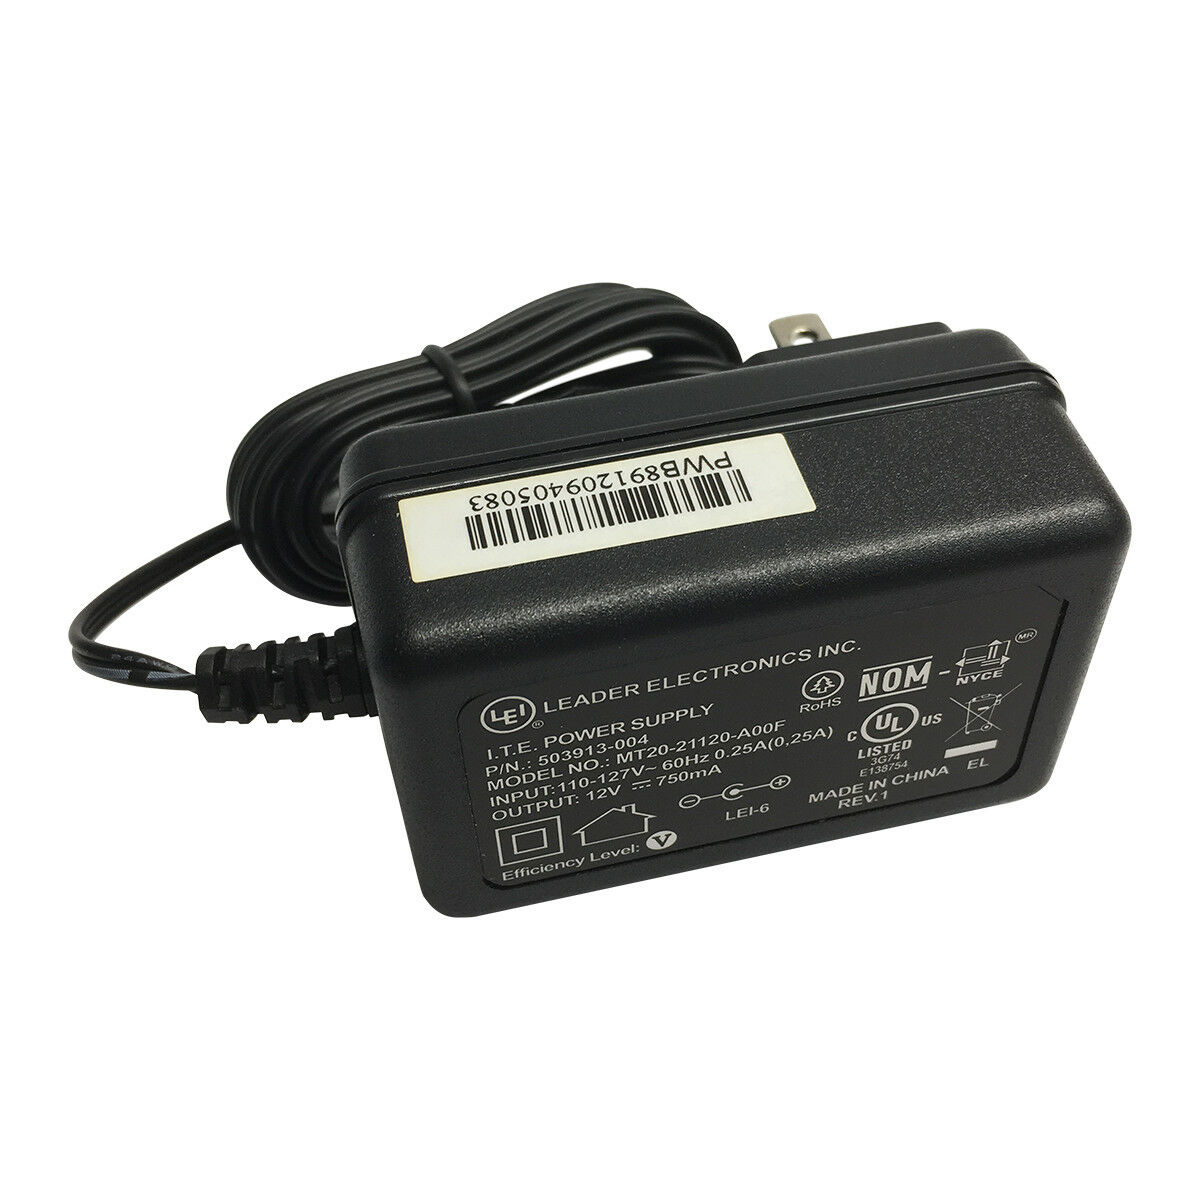 New DC12V 750mA LEI MT20-21120-A00F Power Supply Ac Adapter